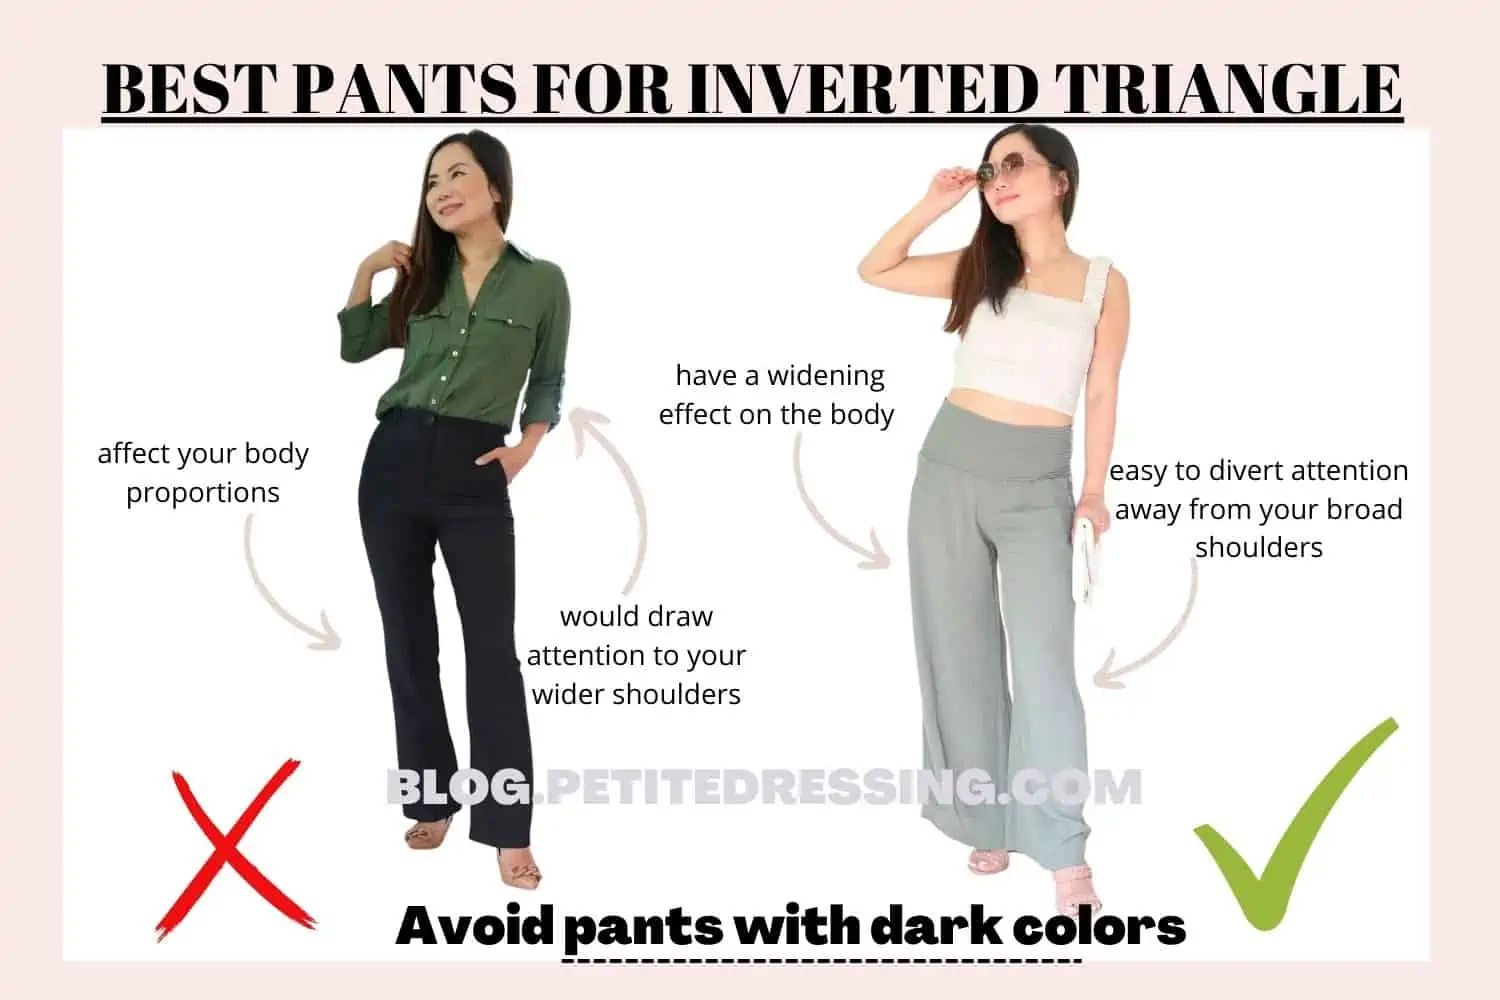 The Complete Pants Guide for the Inverted Triangle Shape - Petite Dressing